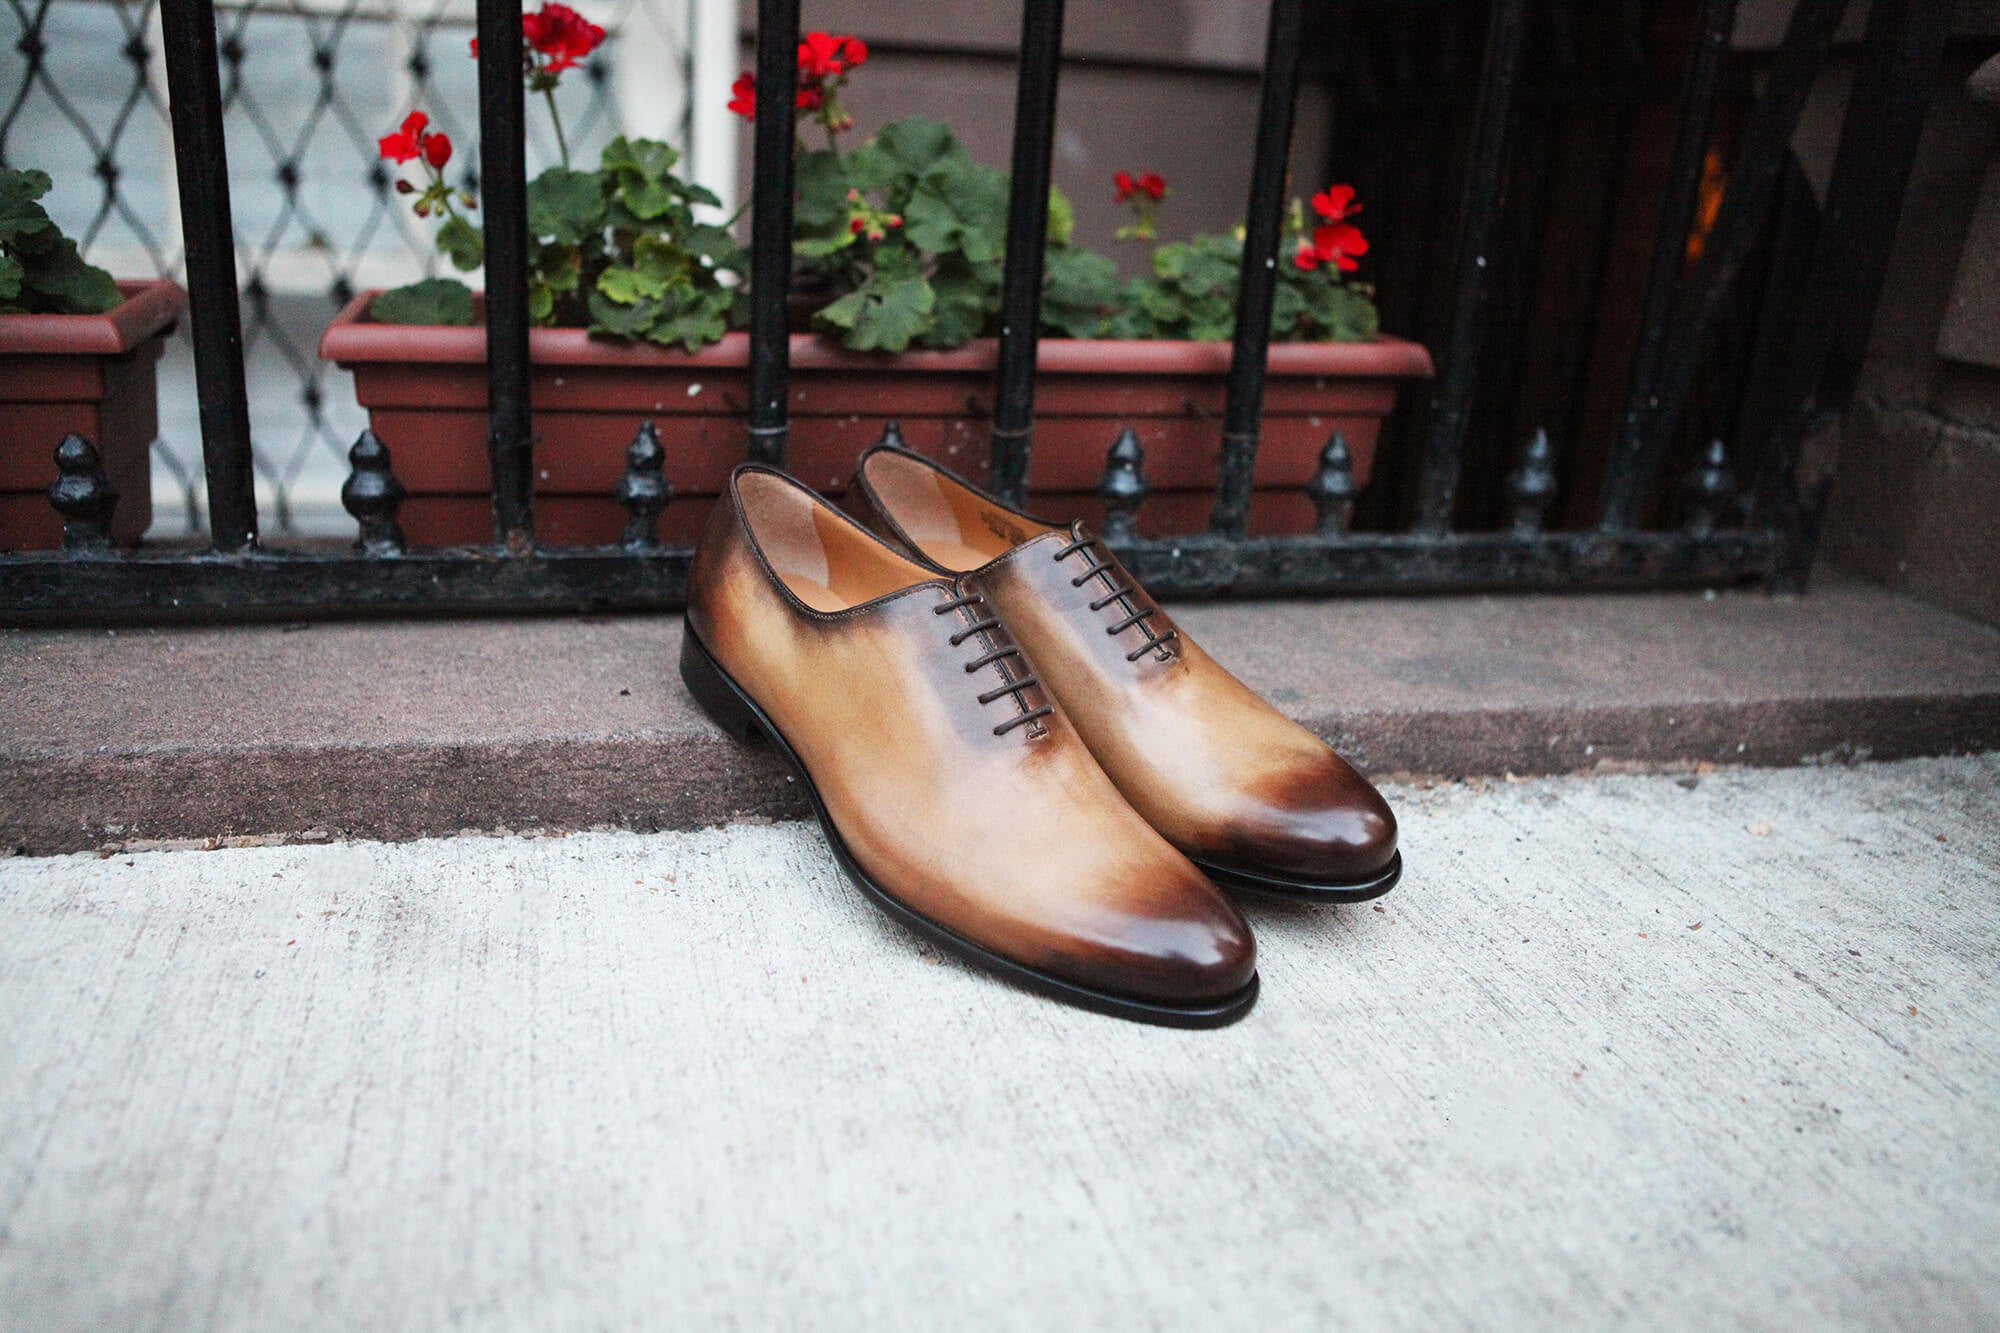 When it comes to protecting your leather shoes, consider quality